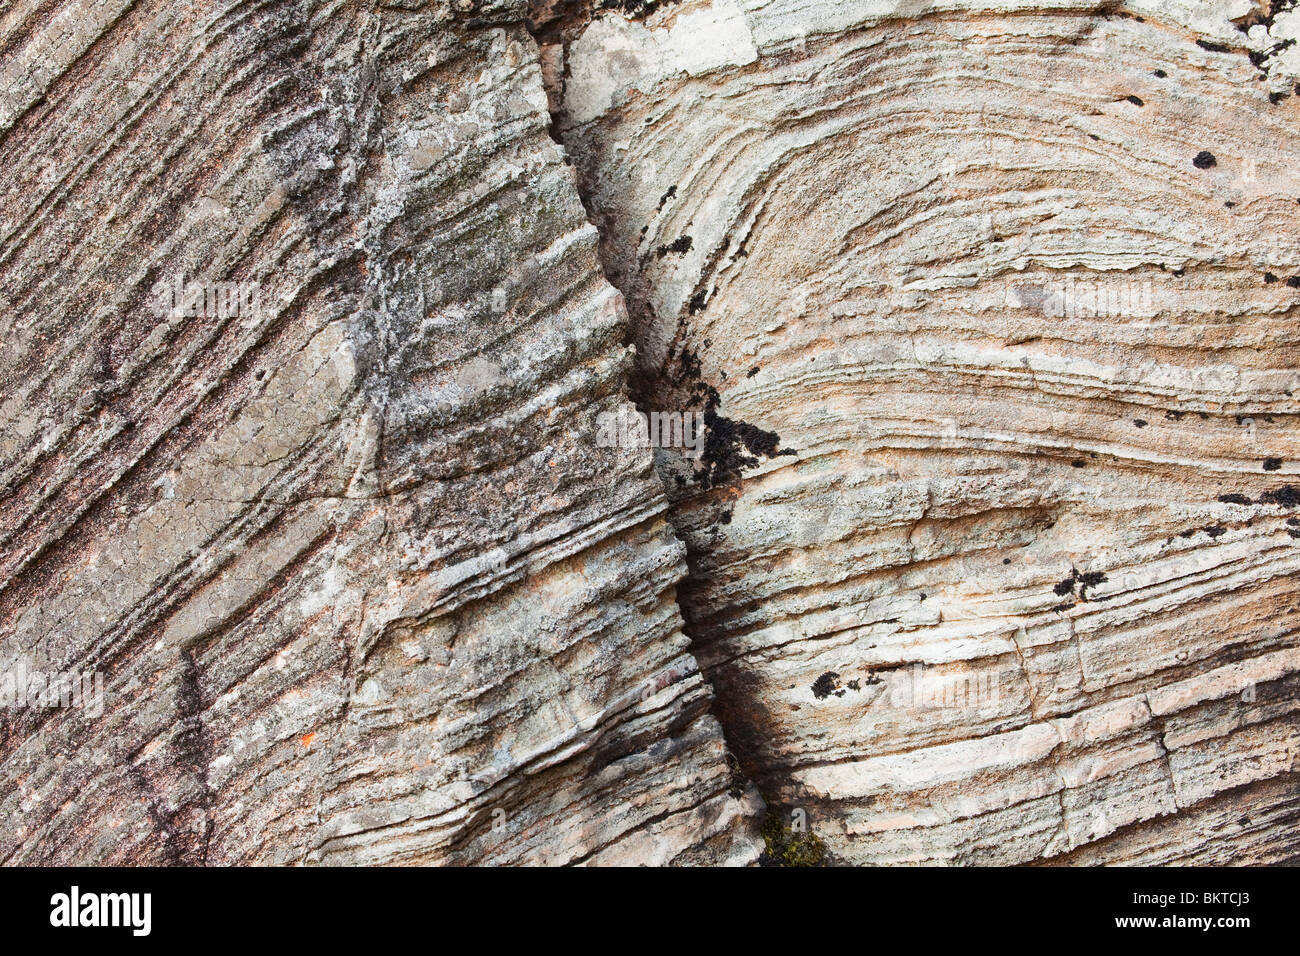 Exposed rock strata in the cliffs of Wasdale in the Lake District National Park Stock Photo